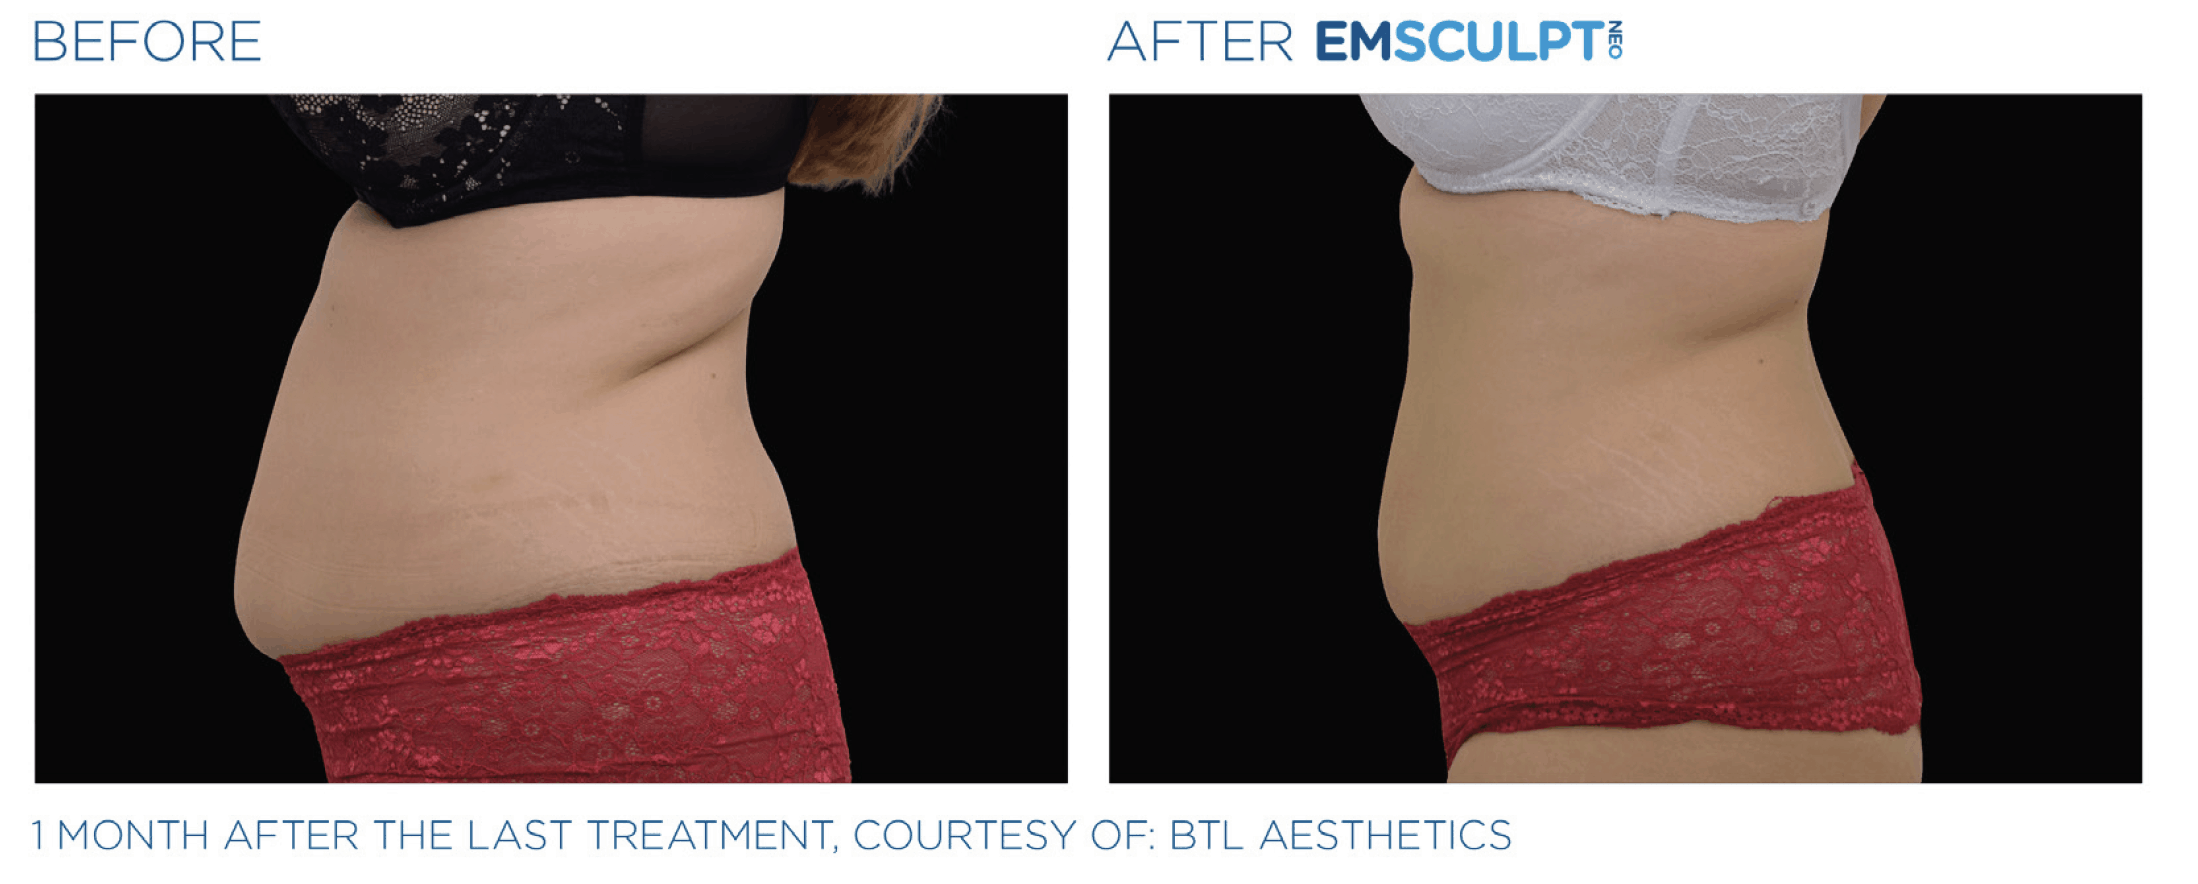 Witness the remarkable transformation of a tummy tuck before and after with the innovative Emsculpt Neo technology. Experience the incredible results achieved by this groundbreaking procedure in sculpting and toning